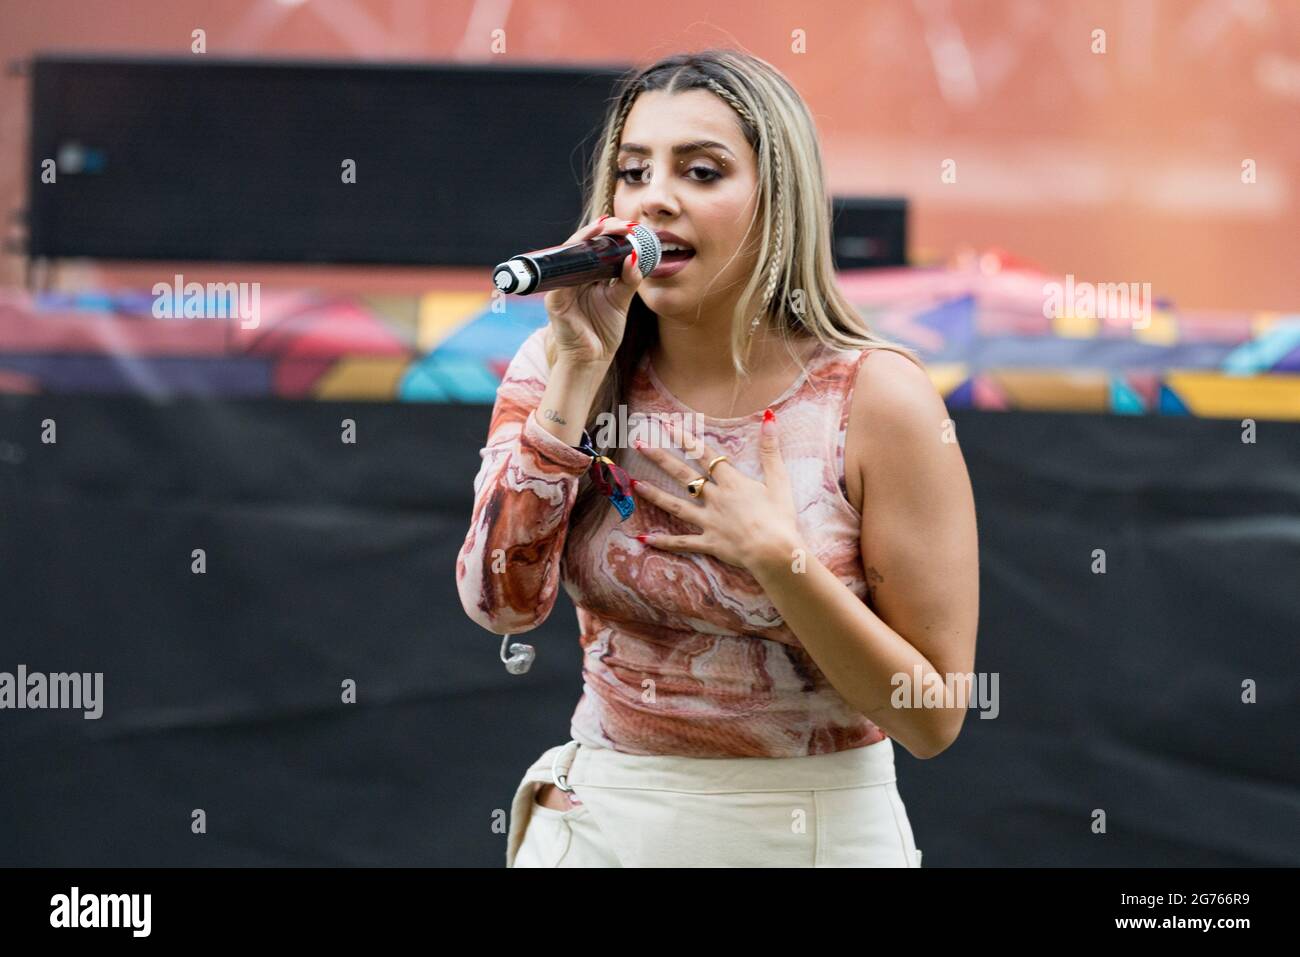 Paula Cendejas performs on stage during the Big Sound Festival.Paula  Cendejas rose to fame thanks to social networks covering a good number of  artists on both YouTube and Instagram. She sang from